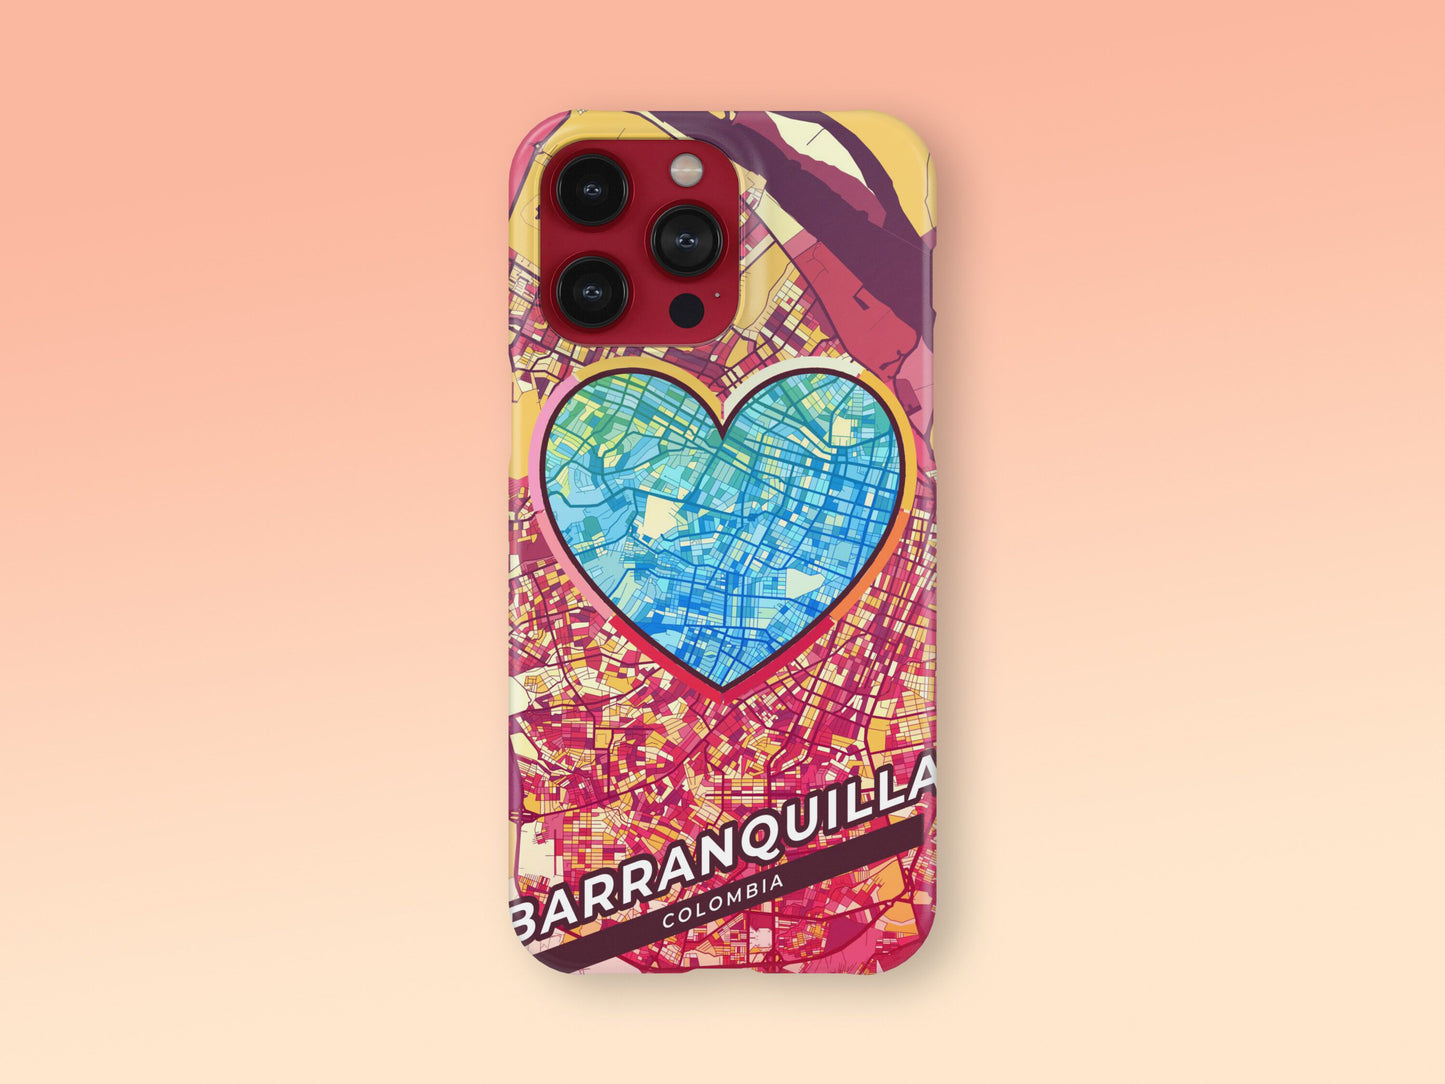 Barranquilla Colombia slim phone case with colorful icon. Birthday, wedding or housewarming gift. Couple match cases. 2